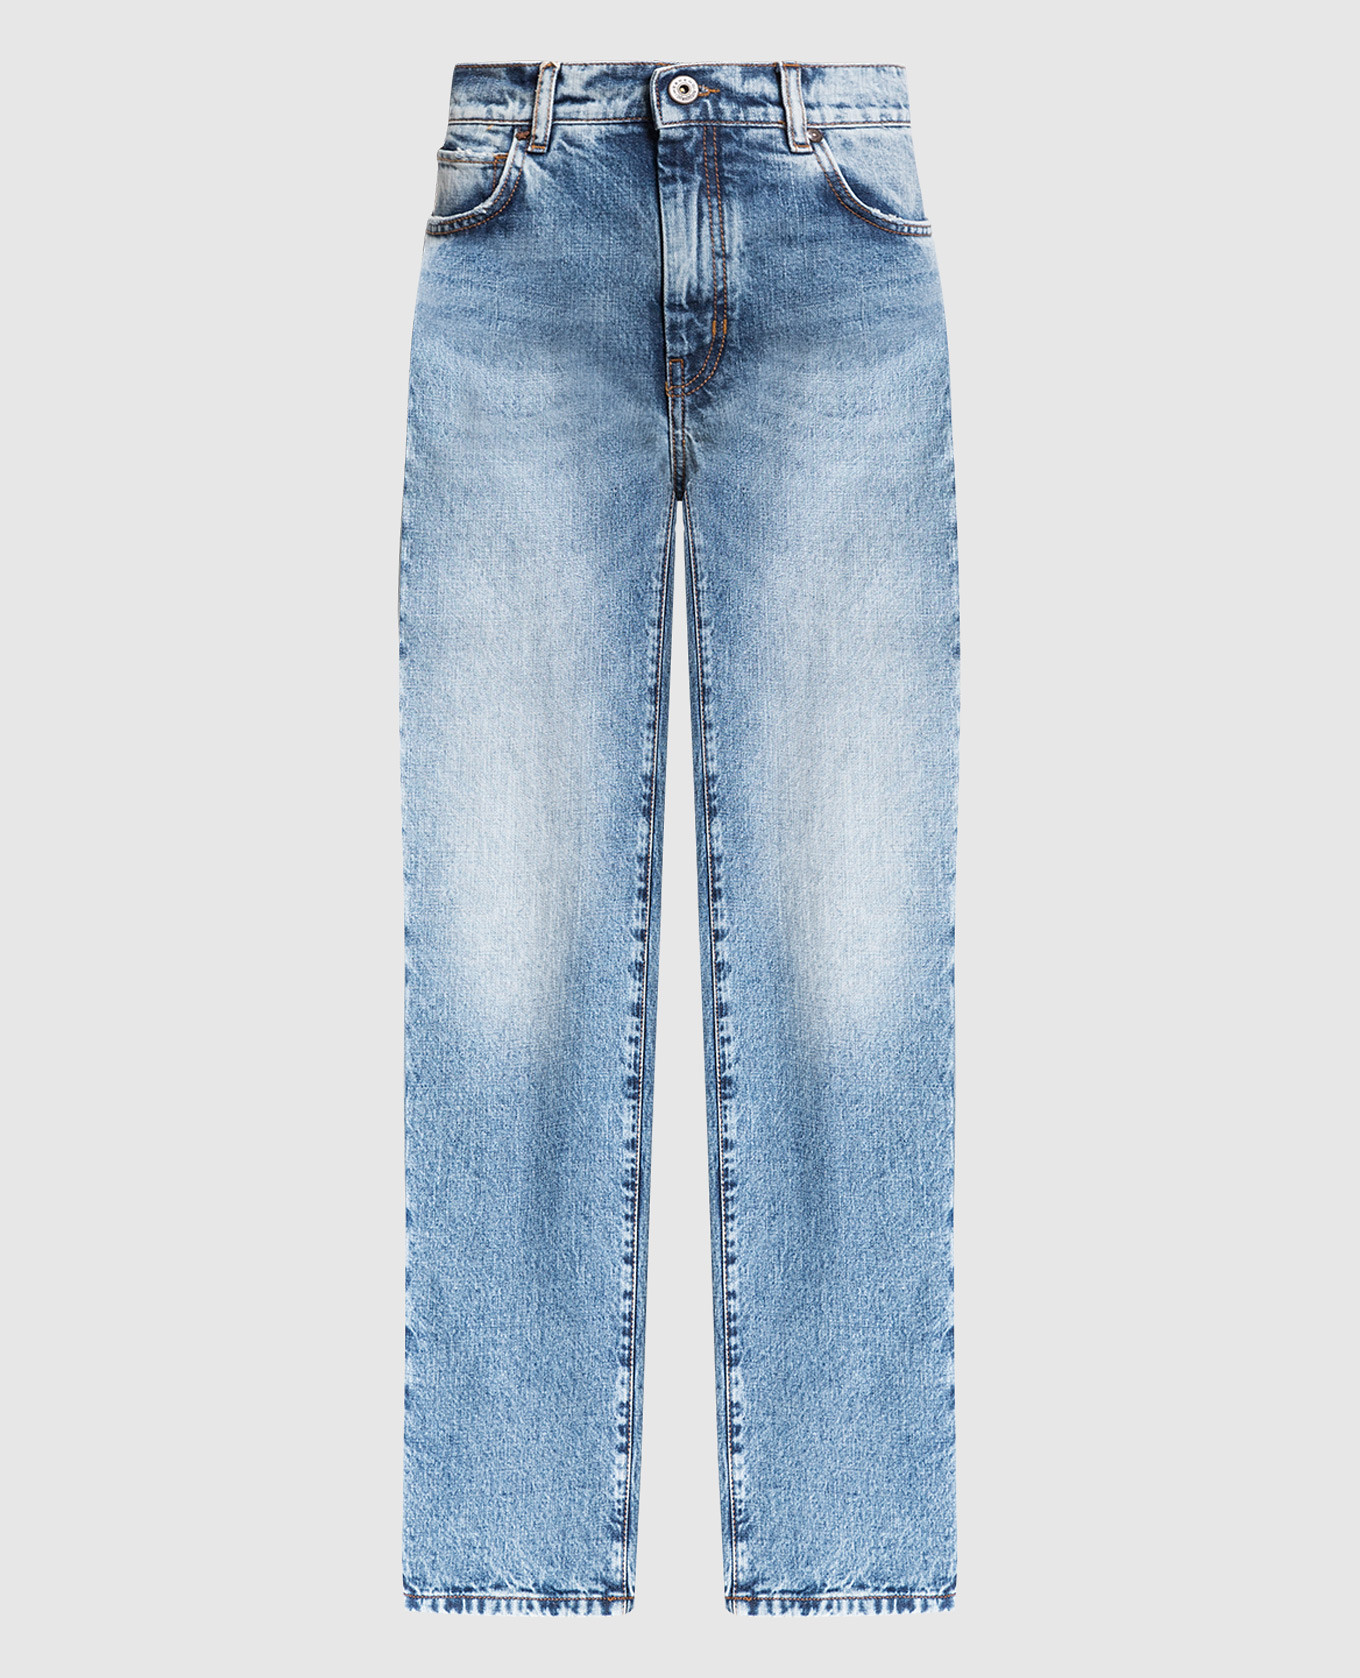 ORTISEI blue jeans with a distressed effect